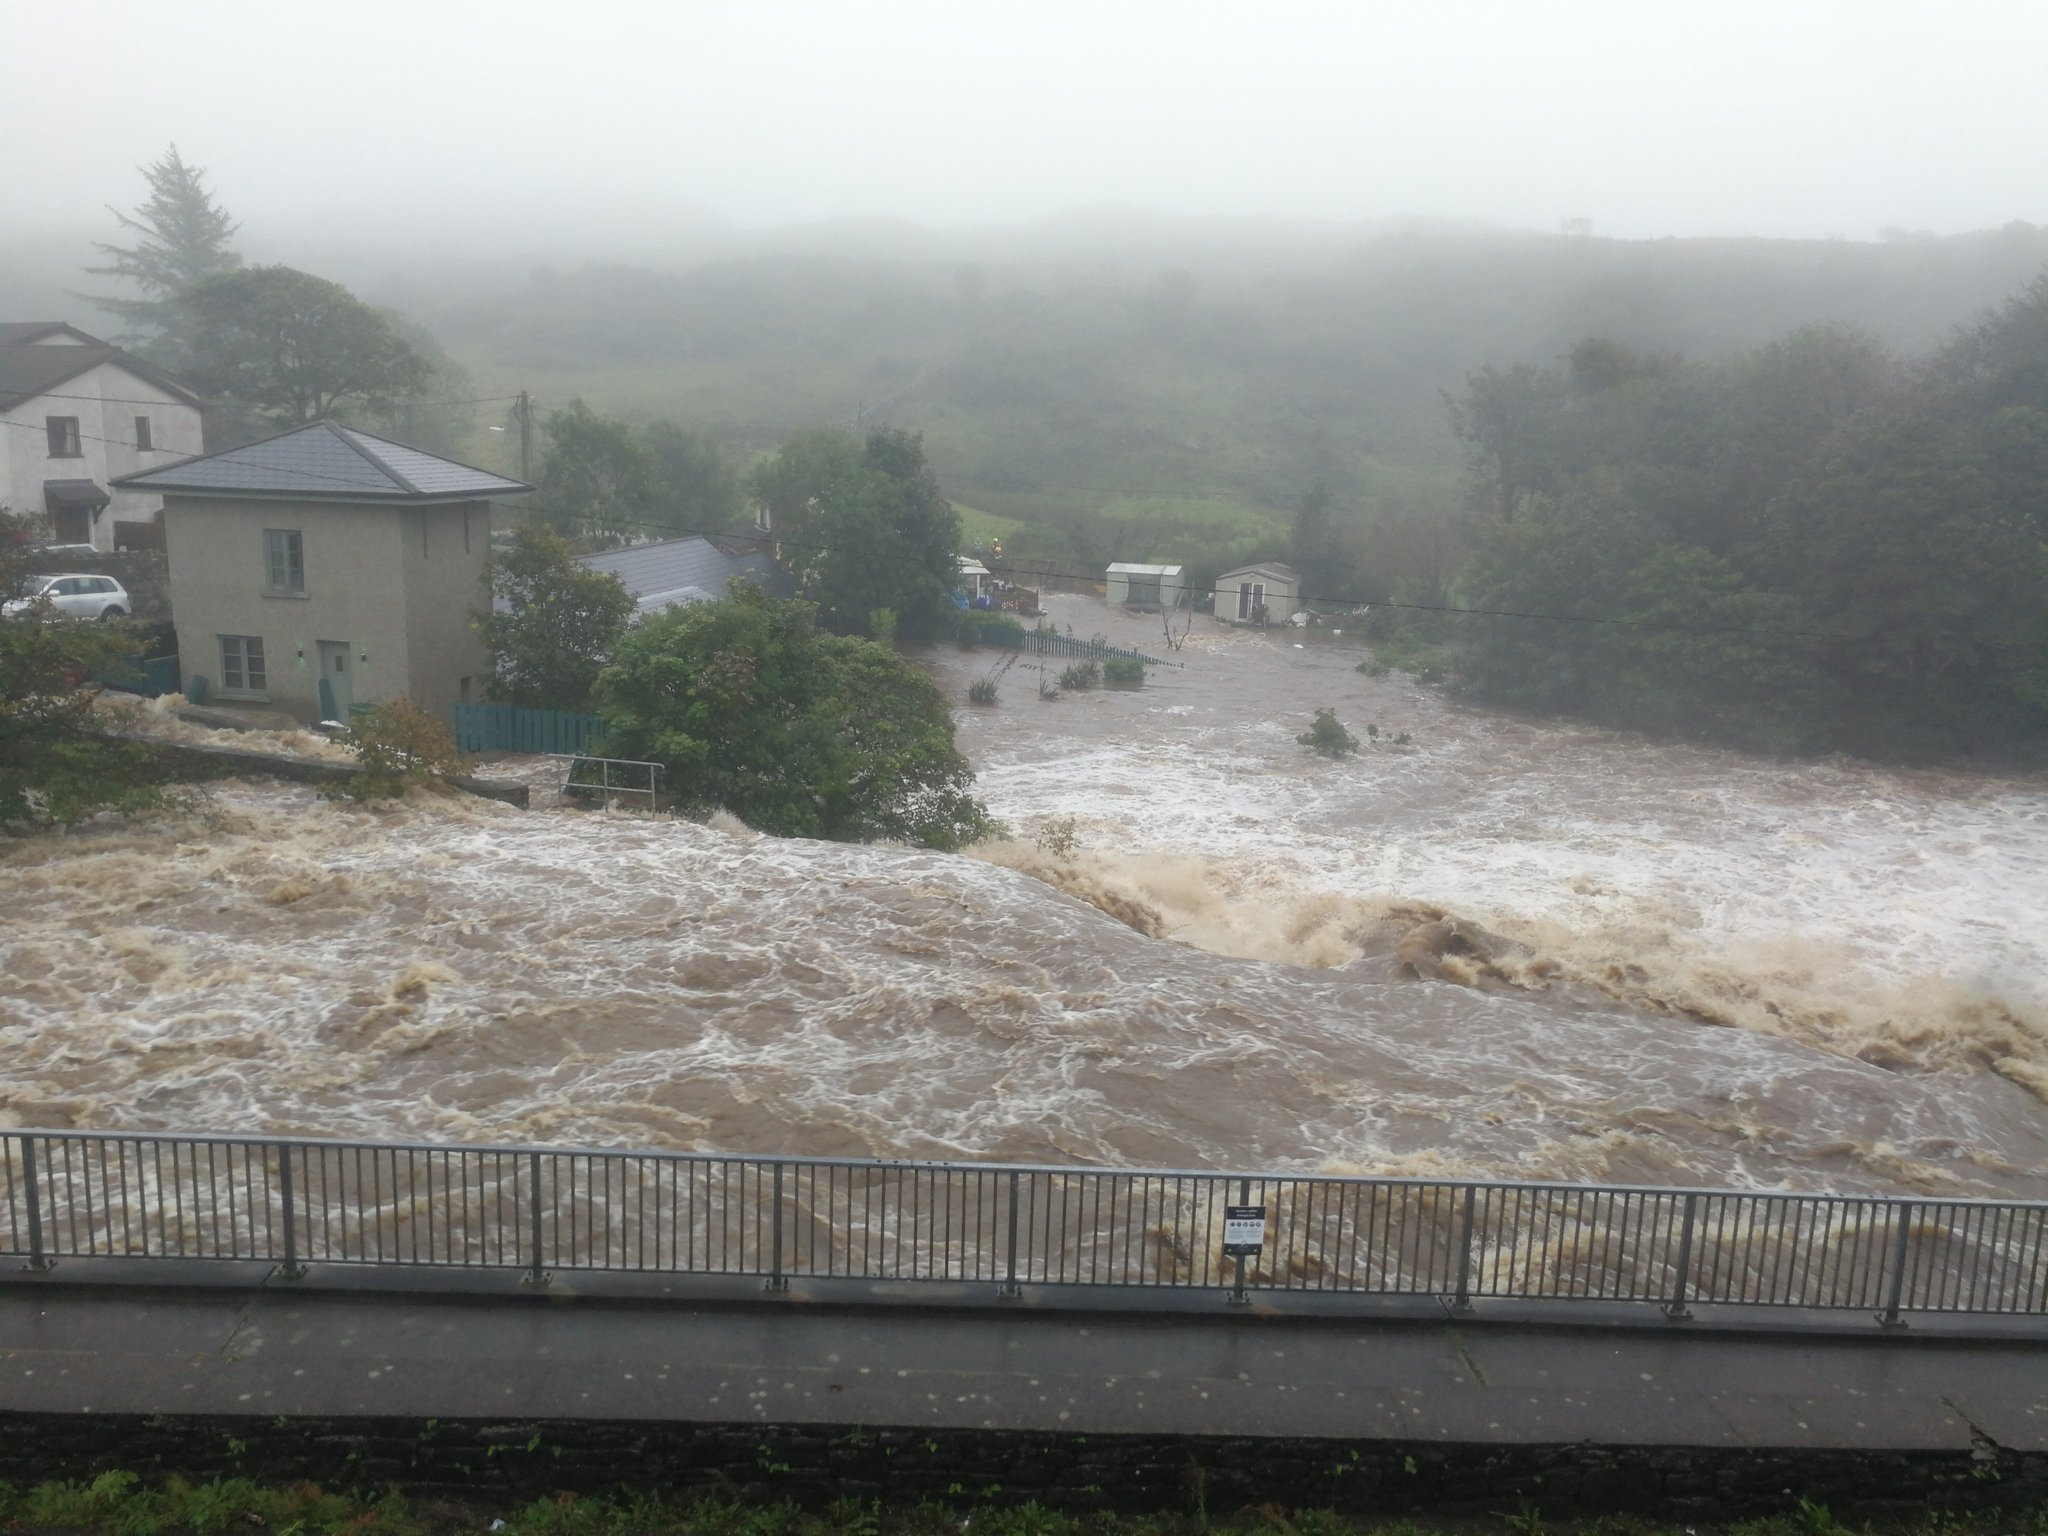 Flooding from the Owenglin river in Clifden, 02 September 2020. Credit: Elena Vaughan, published with permission